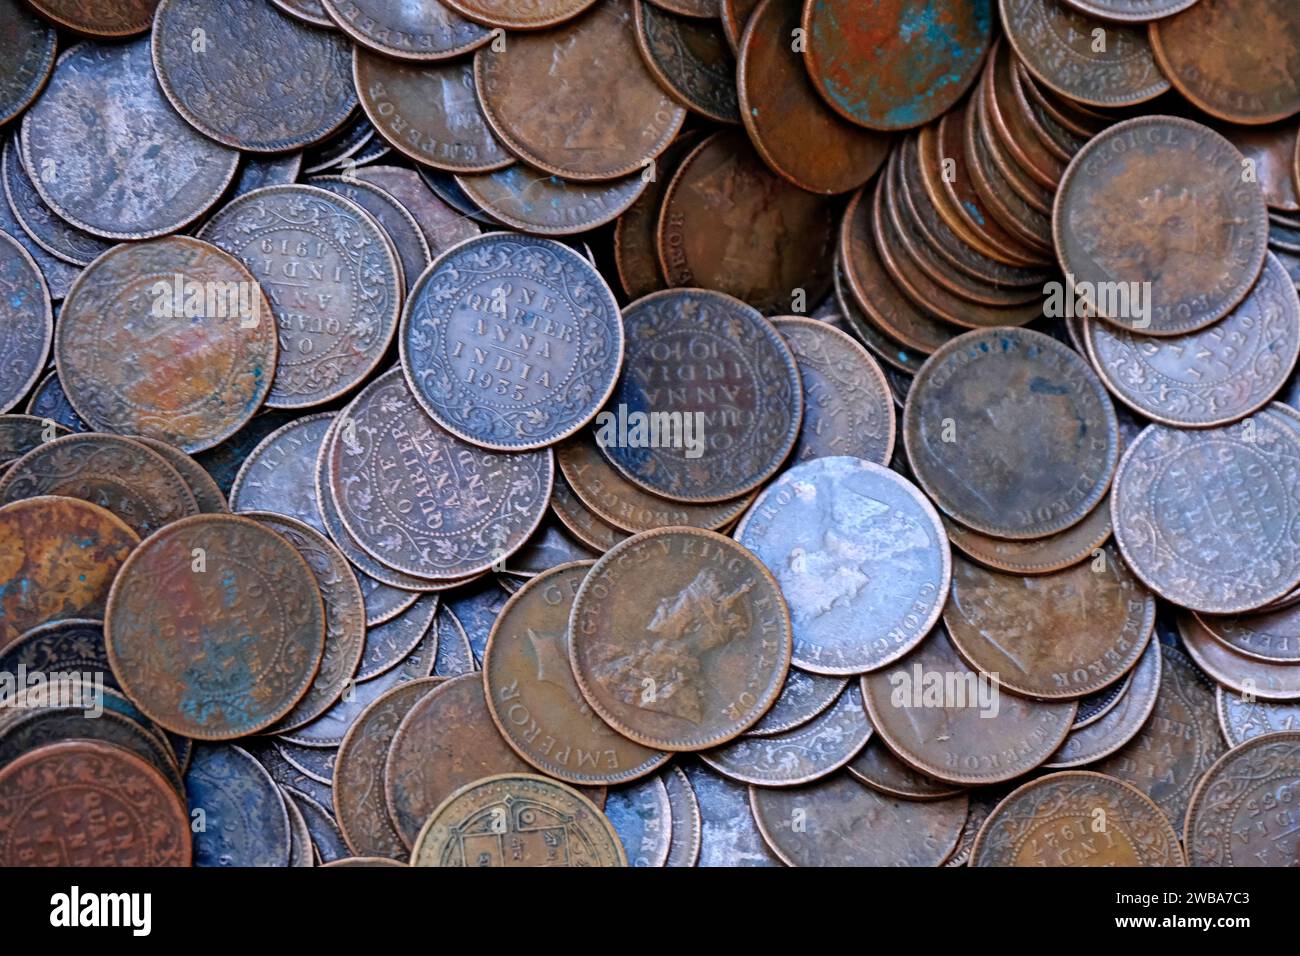 Indian Old vintage coins, vintage coin abstract with English & Indian coins in forefront. Stock Photo